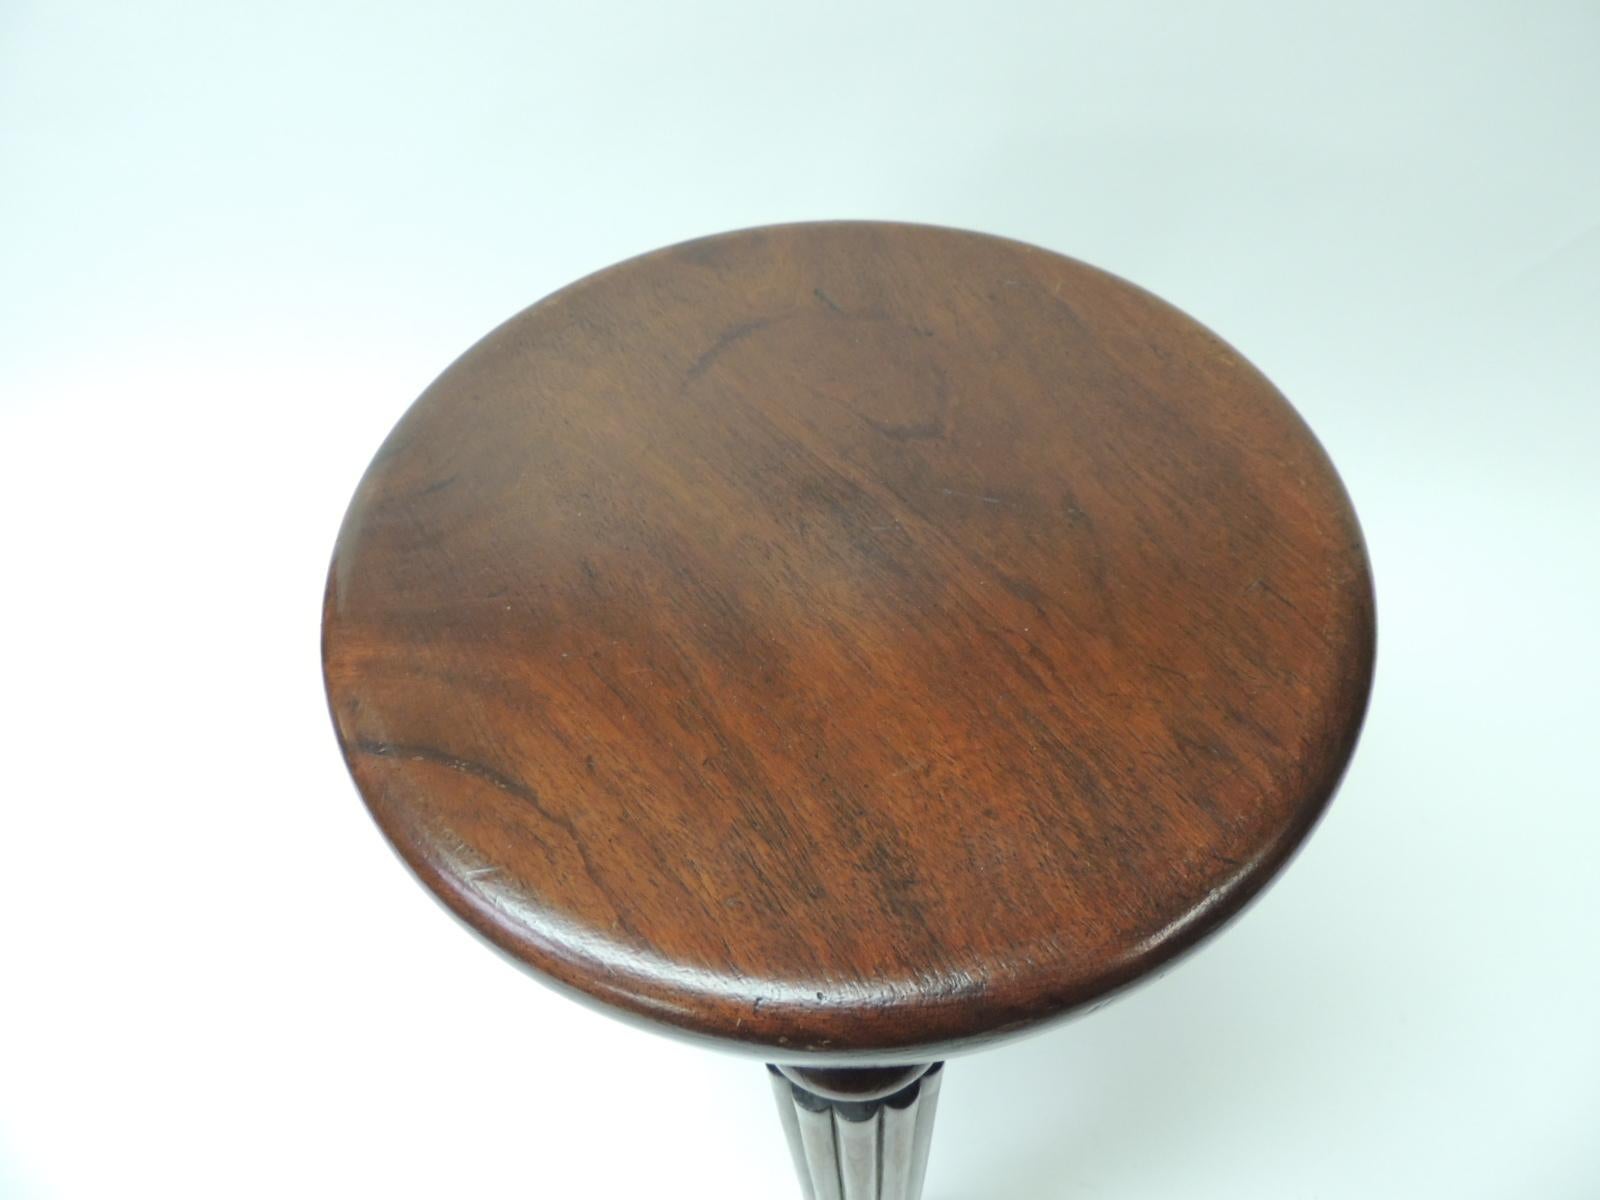 19th century English round footstool
Tripod style fluted legs milking stool with thick round seat
Mahogany finish on wood,
circa 1830
Size: 10 D x 13.5 SH.
 